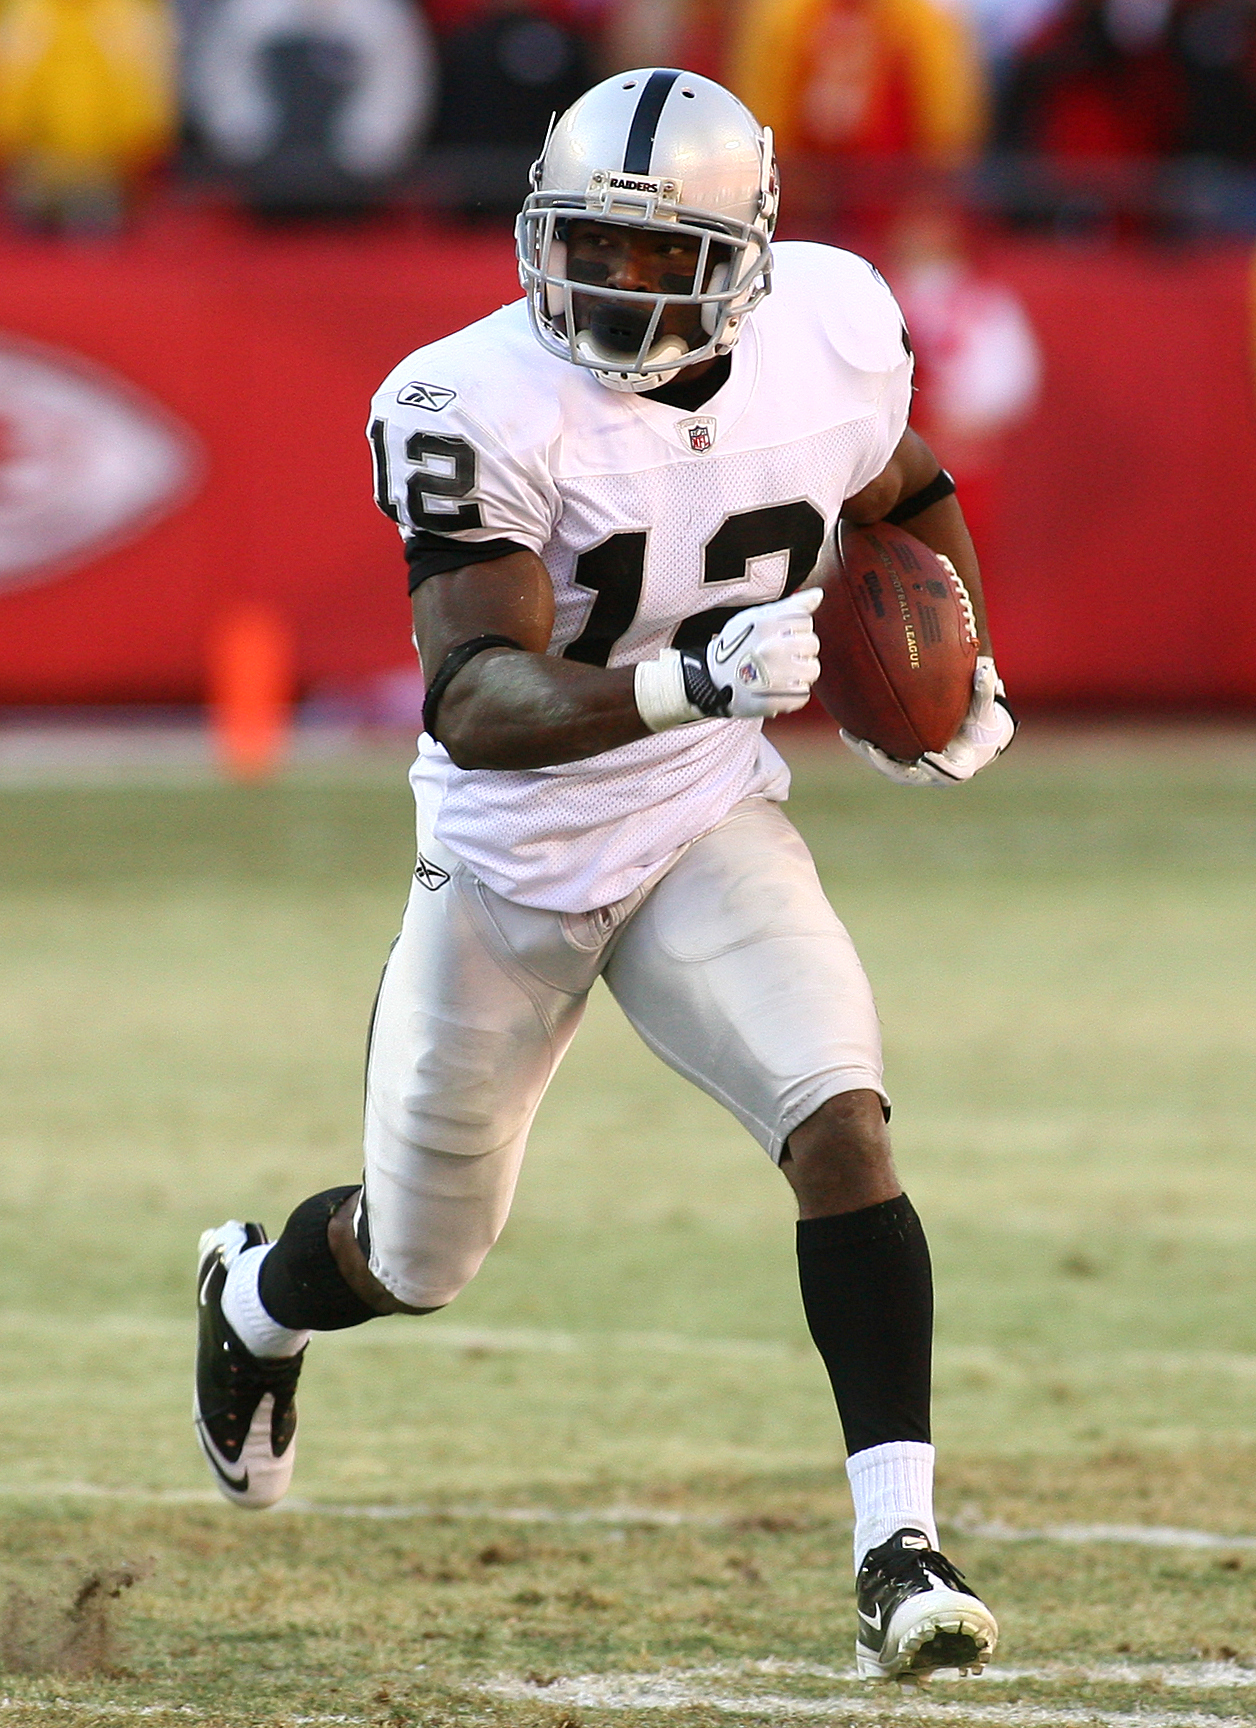 KANSAS CITY, MO - JANUARY 02:  Wide receiver Jacoby Ford #12 of the Oakland Raiders runs down field in a game against the Kansas City Chiefs at Arrowhead Stadium on January 2, 2011 in Kansas City, Missouri.  (Photo by Tim Umphrey/Getty Images)